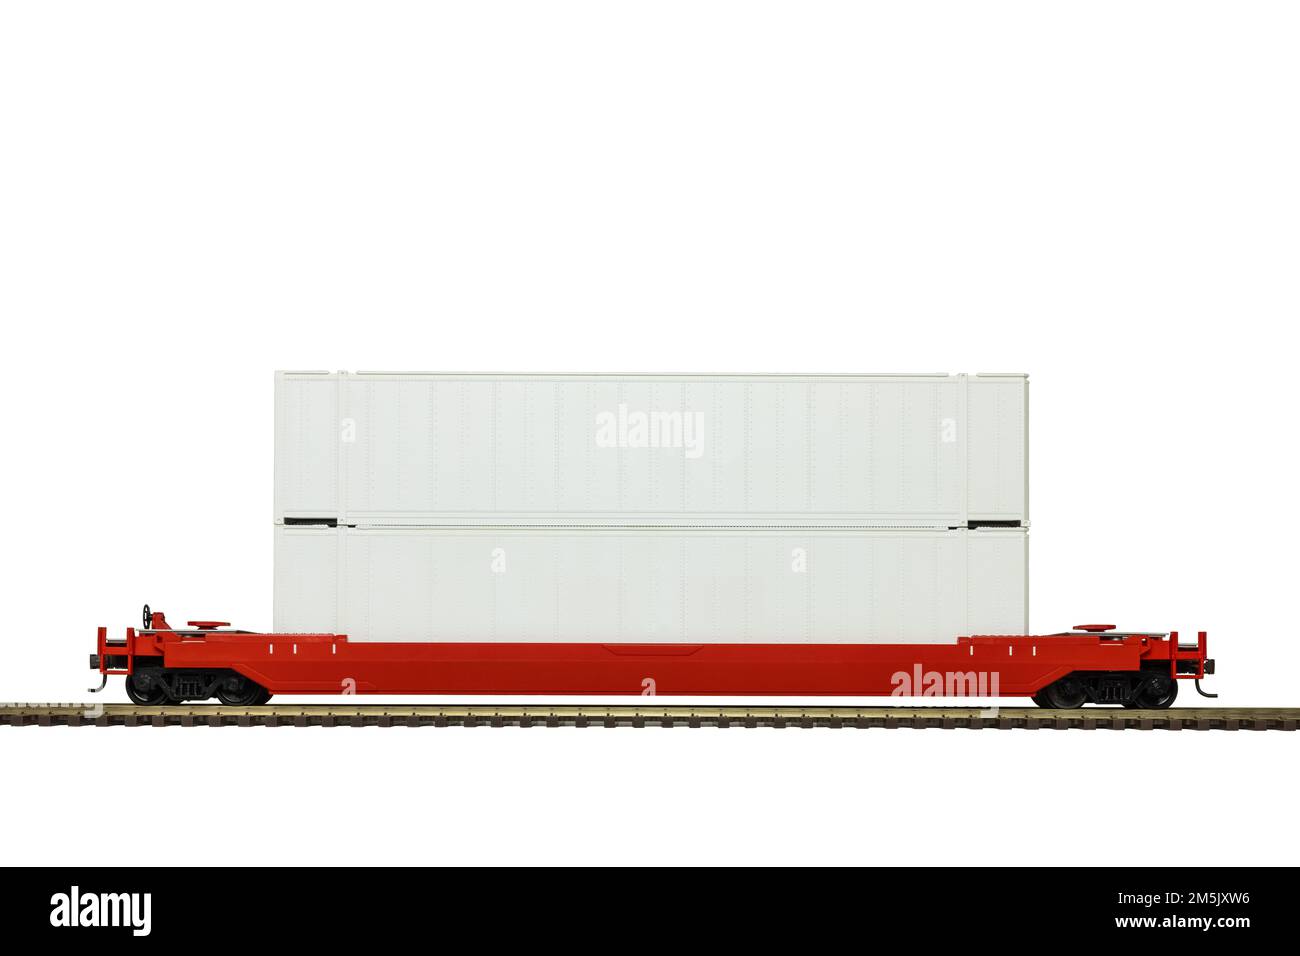 A red double stack intermodal railroad car on track. Stock Photo